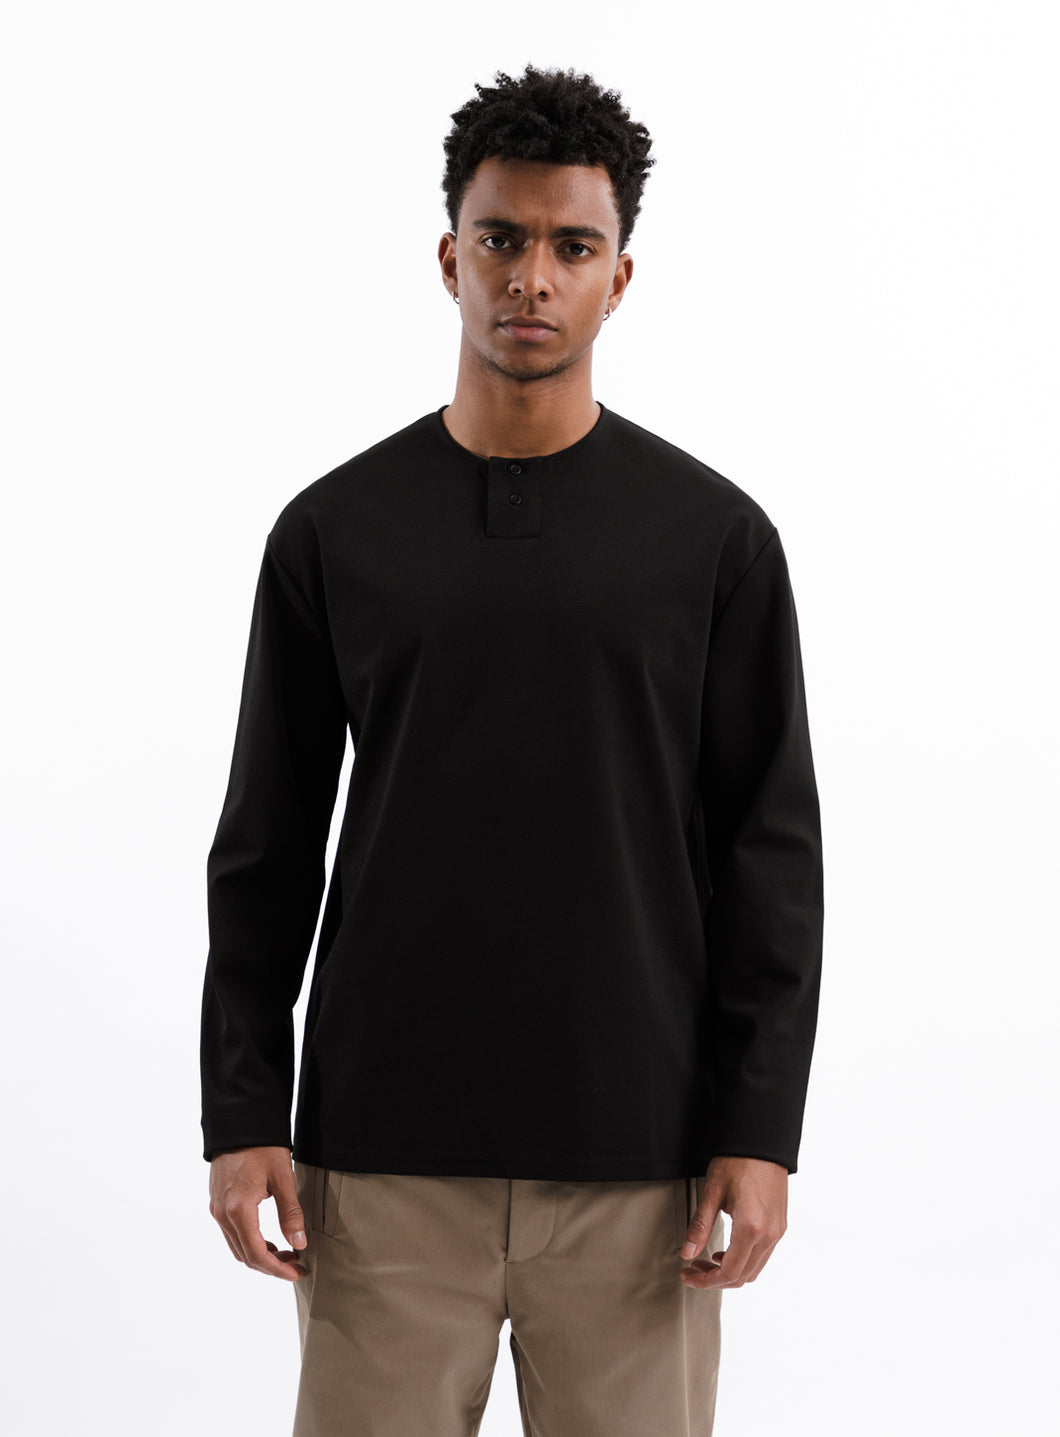 2 Buttons T-Shirt in Black Technical Knit